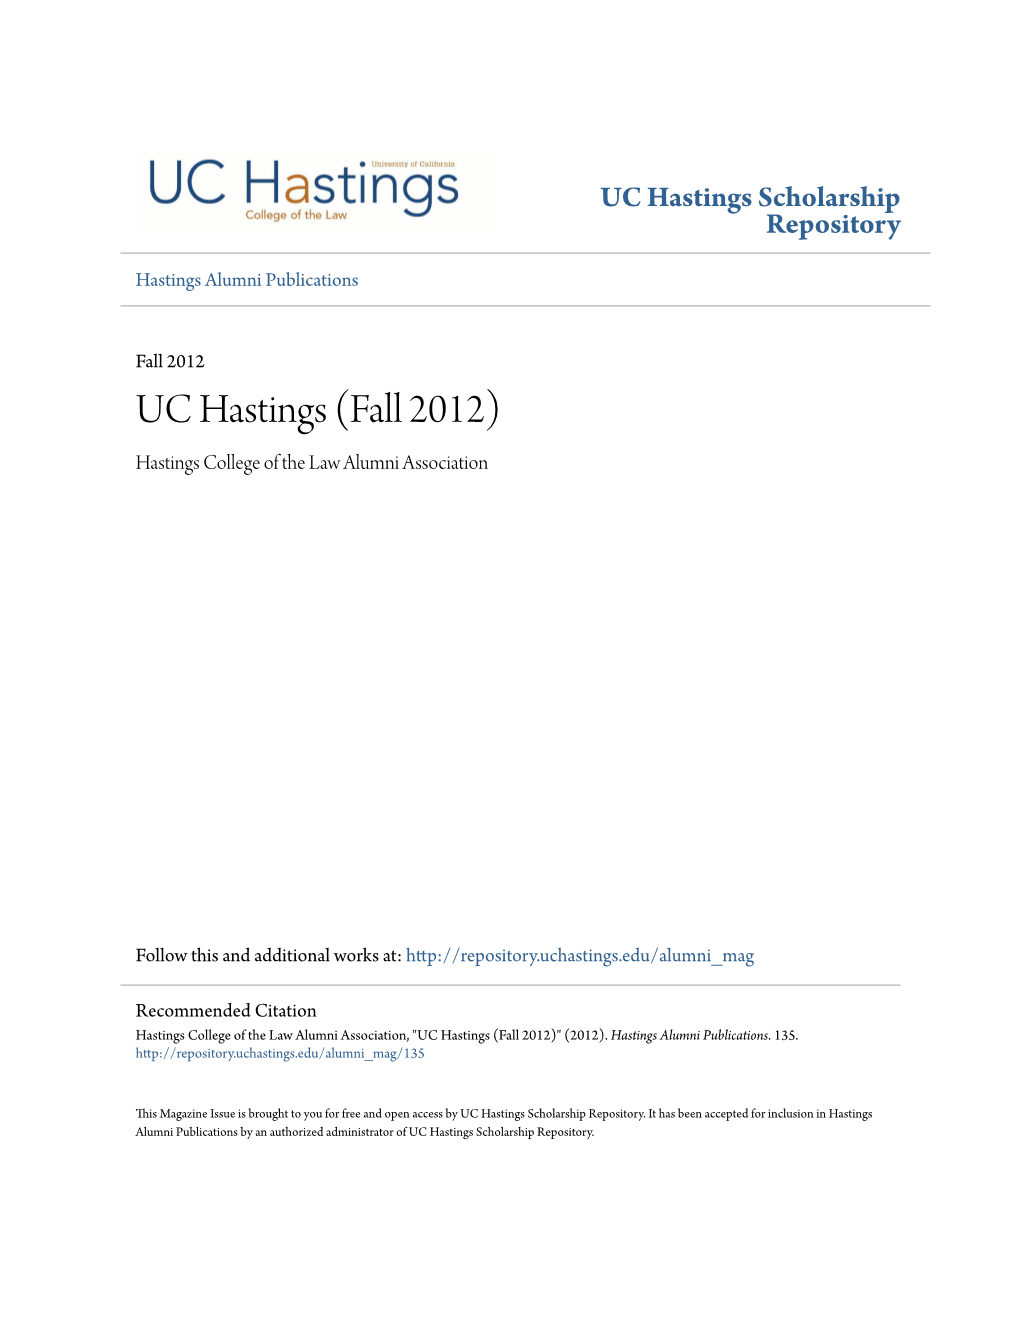 UC Hastings (Fall 2012) Hastings College of the Law Alumni Association